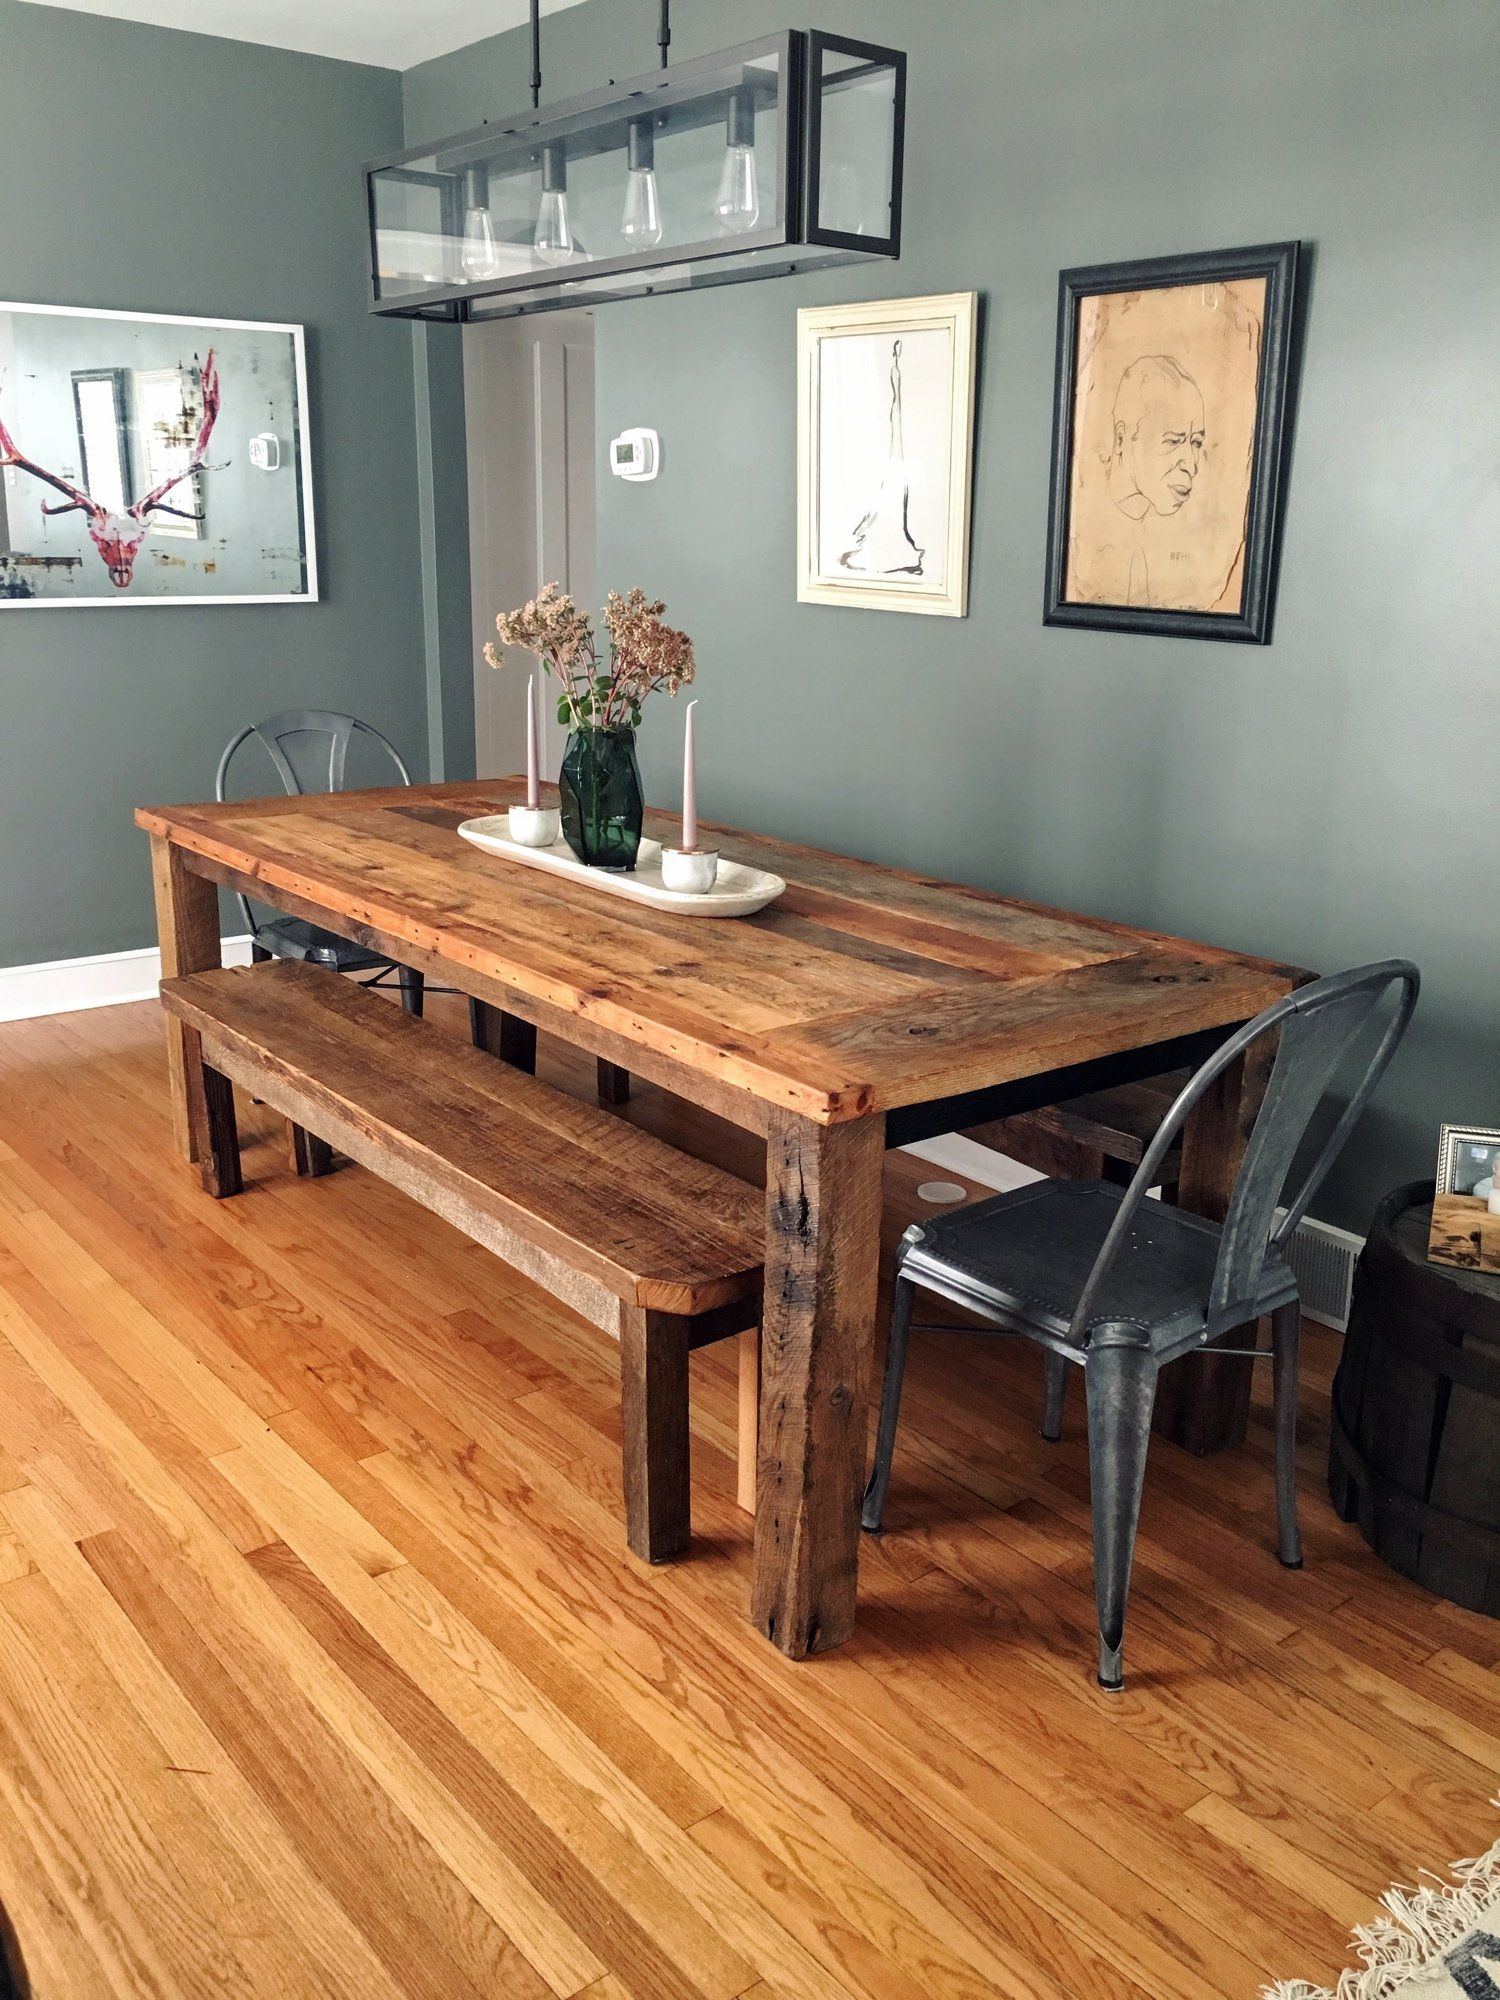  reclaimed wood kitchen table